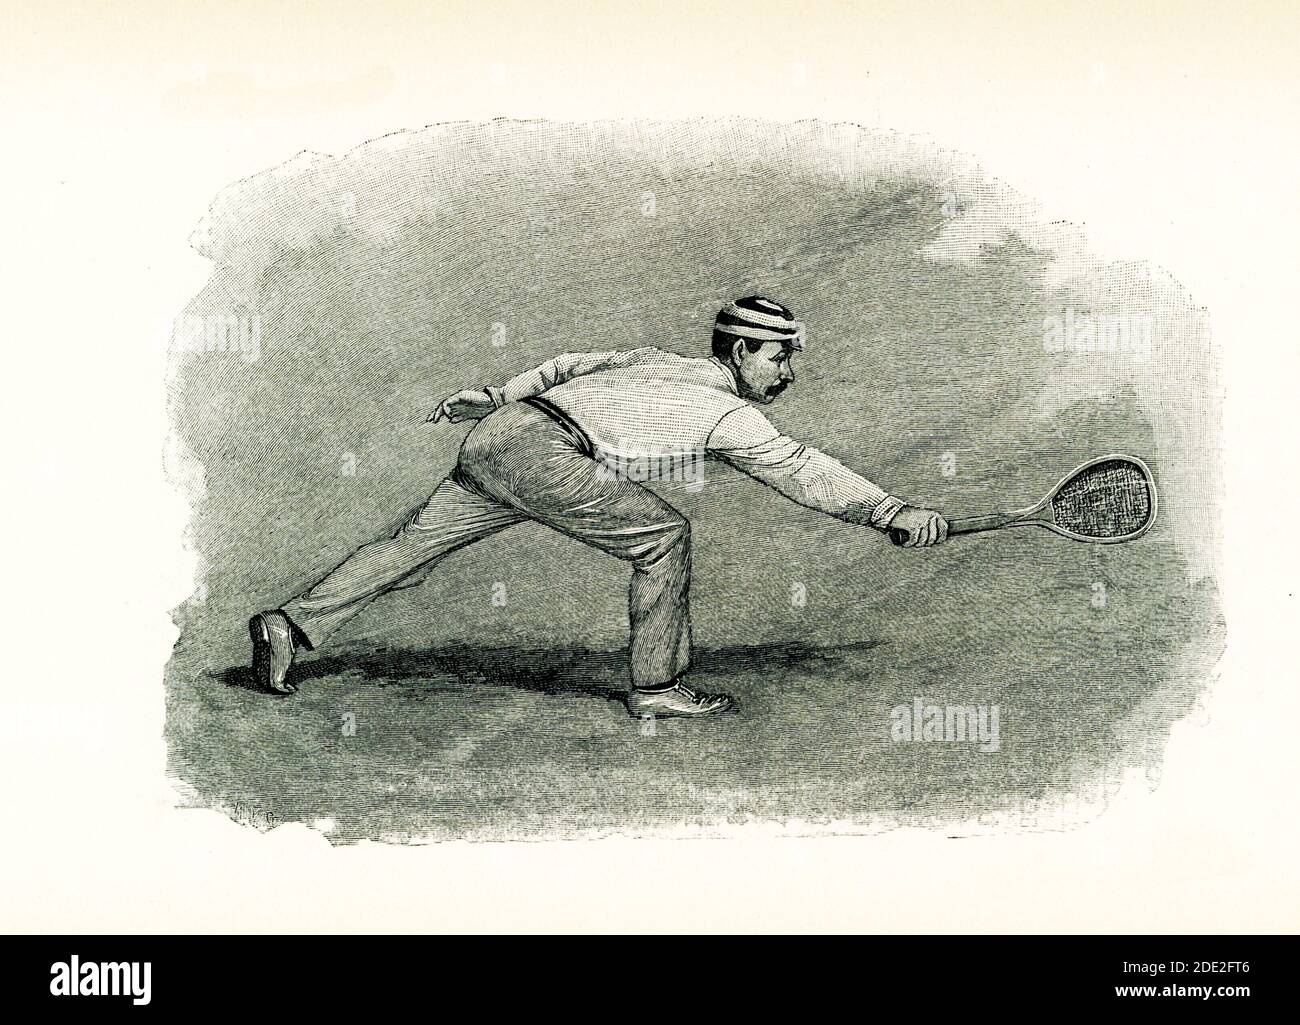 This 1897 illustration of man playing tennis shows him hitting a back-hand half volley. Backhand volleys are hit with the dominant hand on the left side of the body if the player right-handed and the right side of the body if the person is left-handed. A half volley is a shot where a player can’t get to the ball to hit a volley before it bounces, and he doesn’t have enough time to hit a full groundstroke. As a result, he lets the ball bounce and then quickly block or deflect it back to the other side of the court. Stock Photo